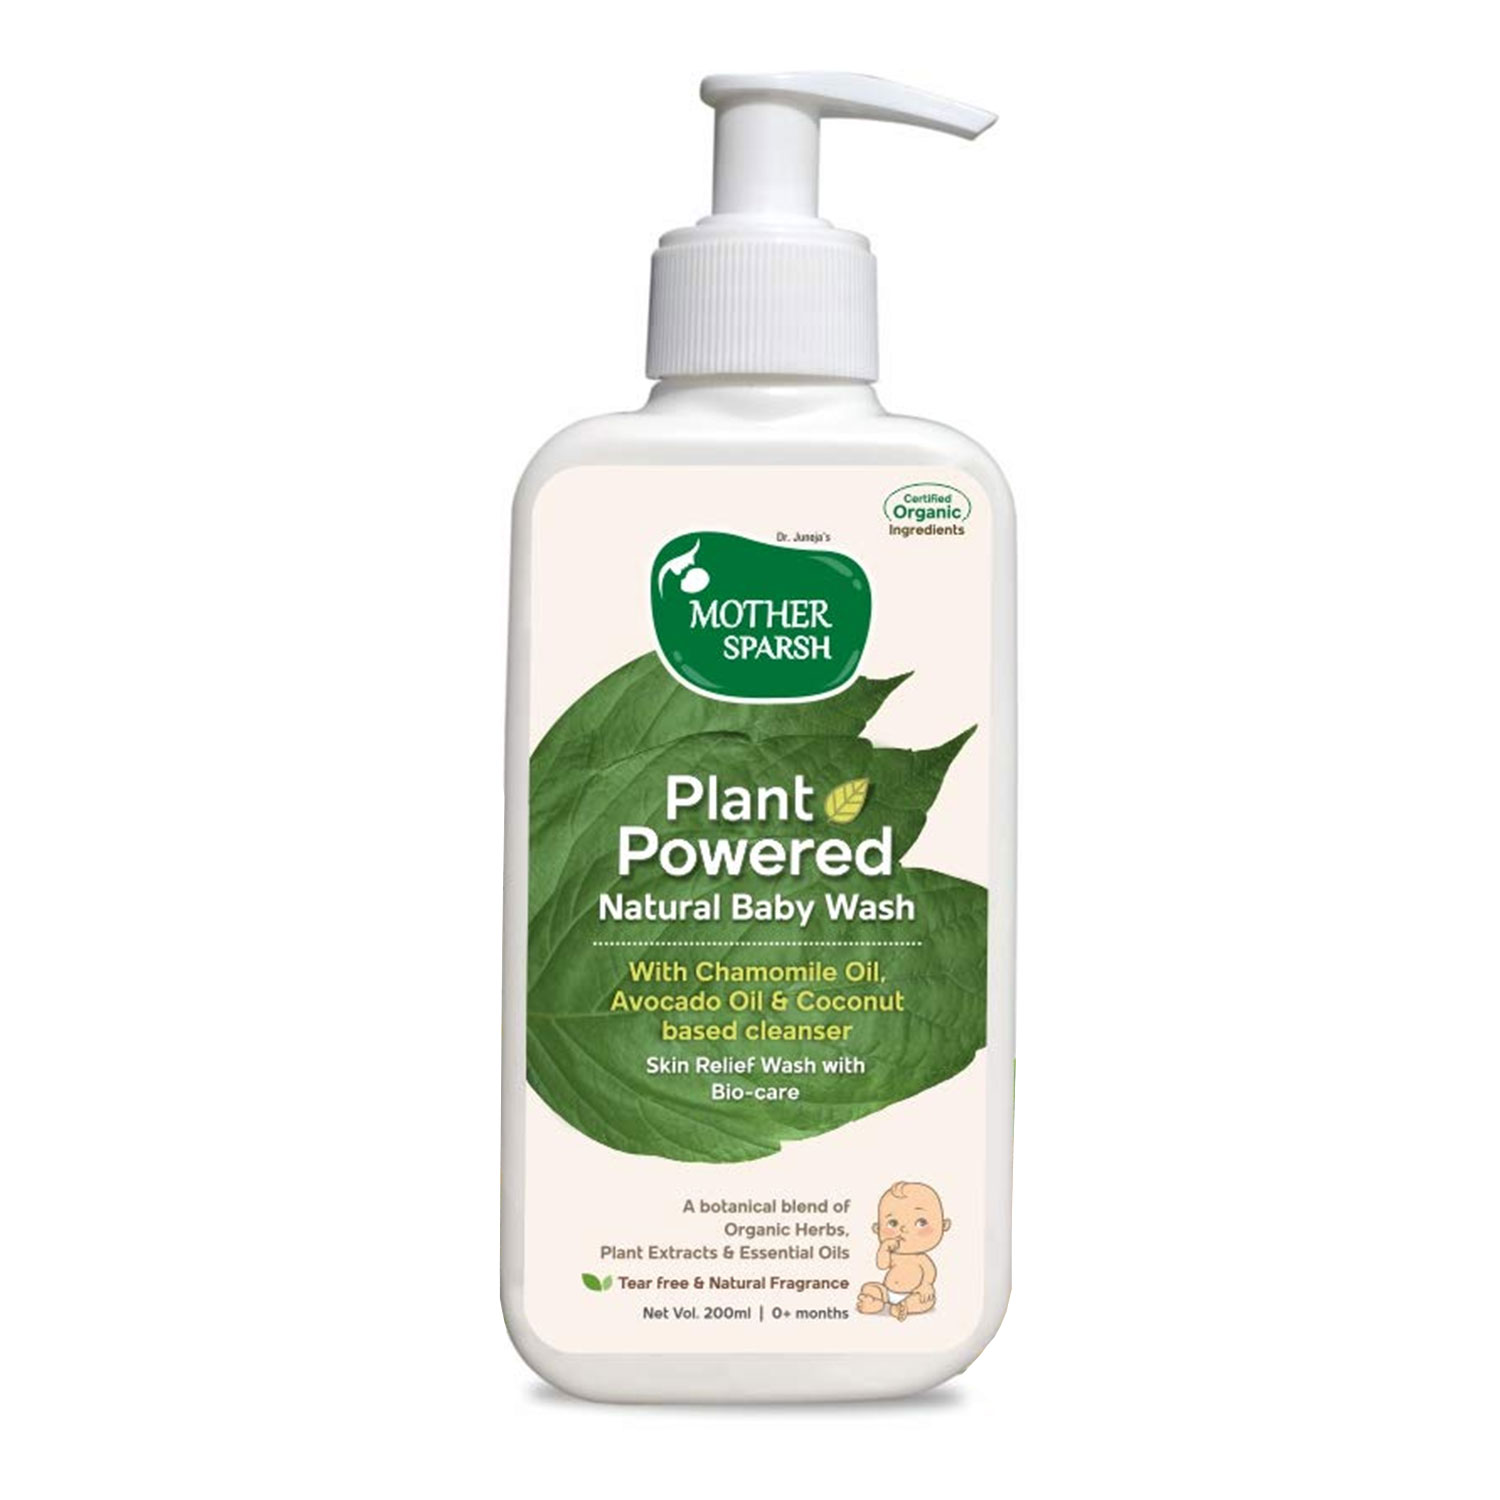 Mother Sparsh Plant Powered Natural Baby Wash, 200 ml